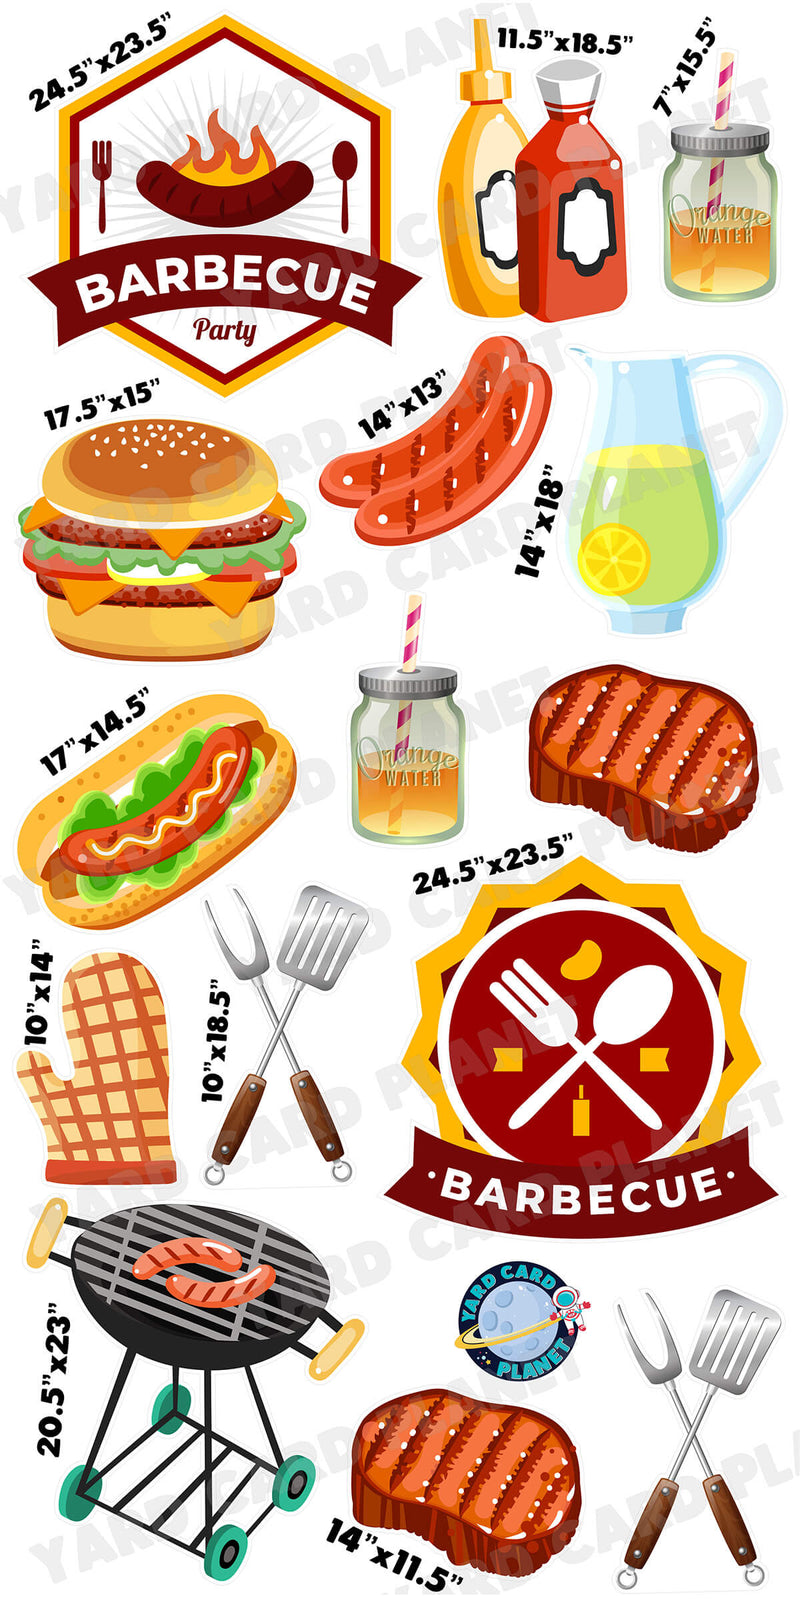 Barbecue Party Yard Card Flair Set